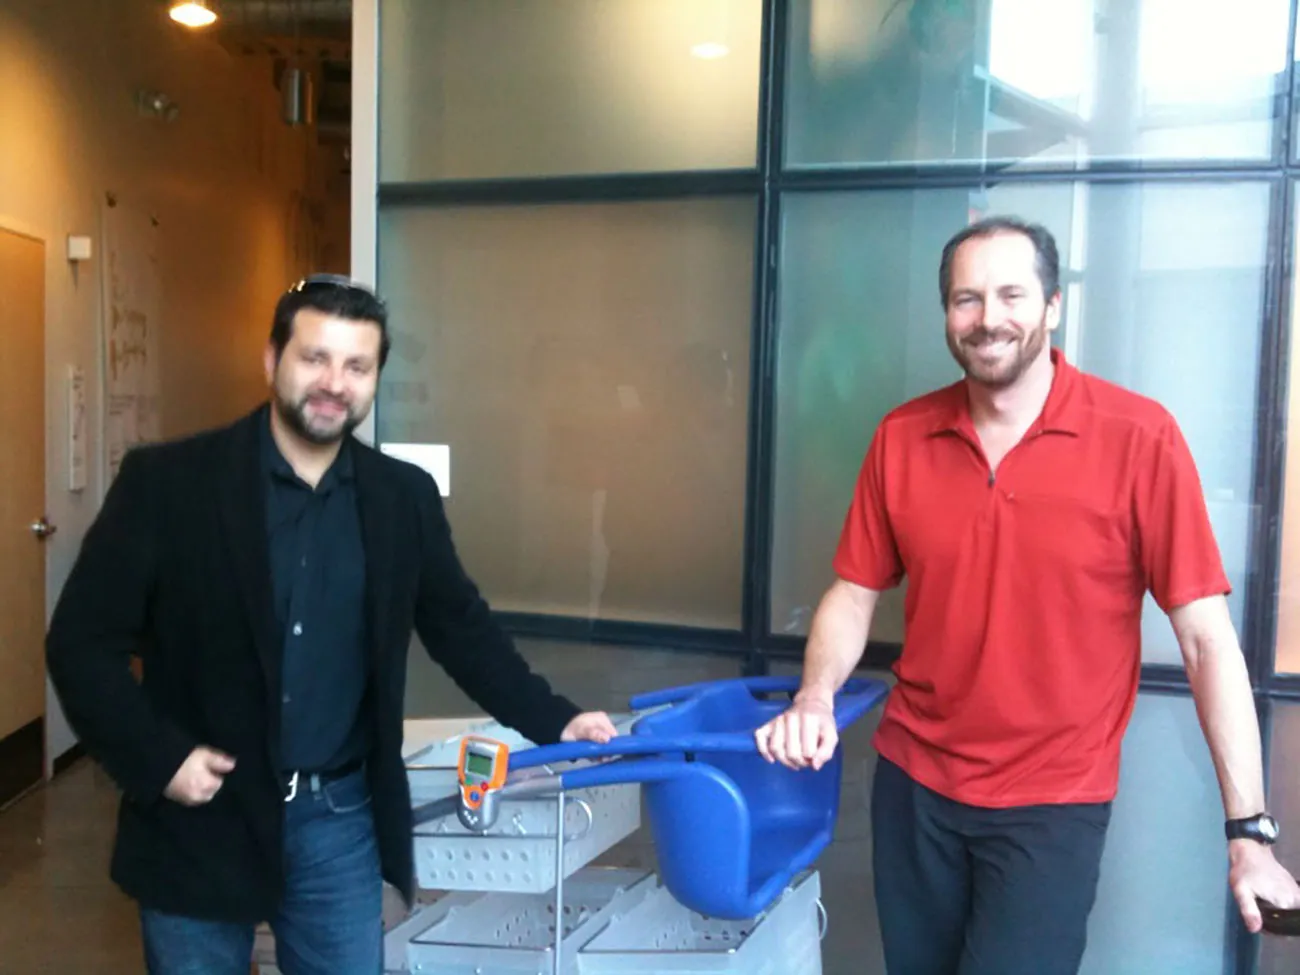 A photo shows two IDEO male representatives posing for the camera with a model of the new shopping cart introduced by IDEO.